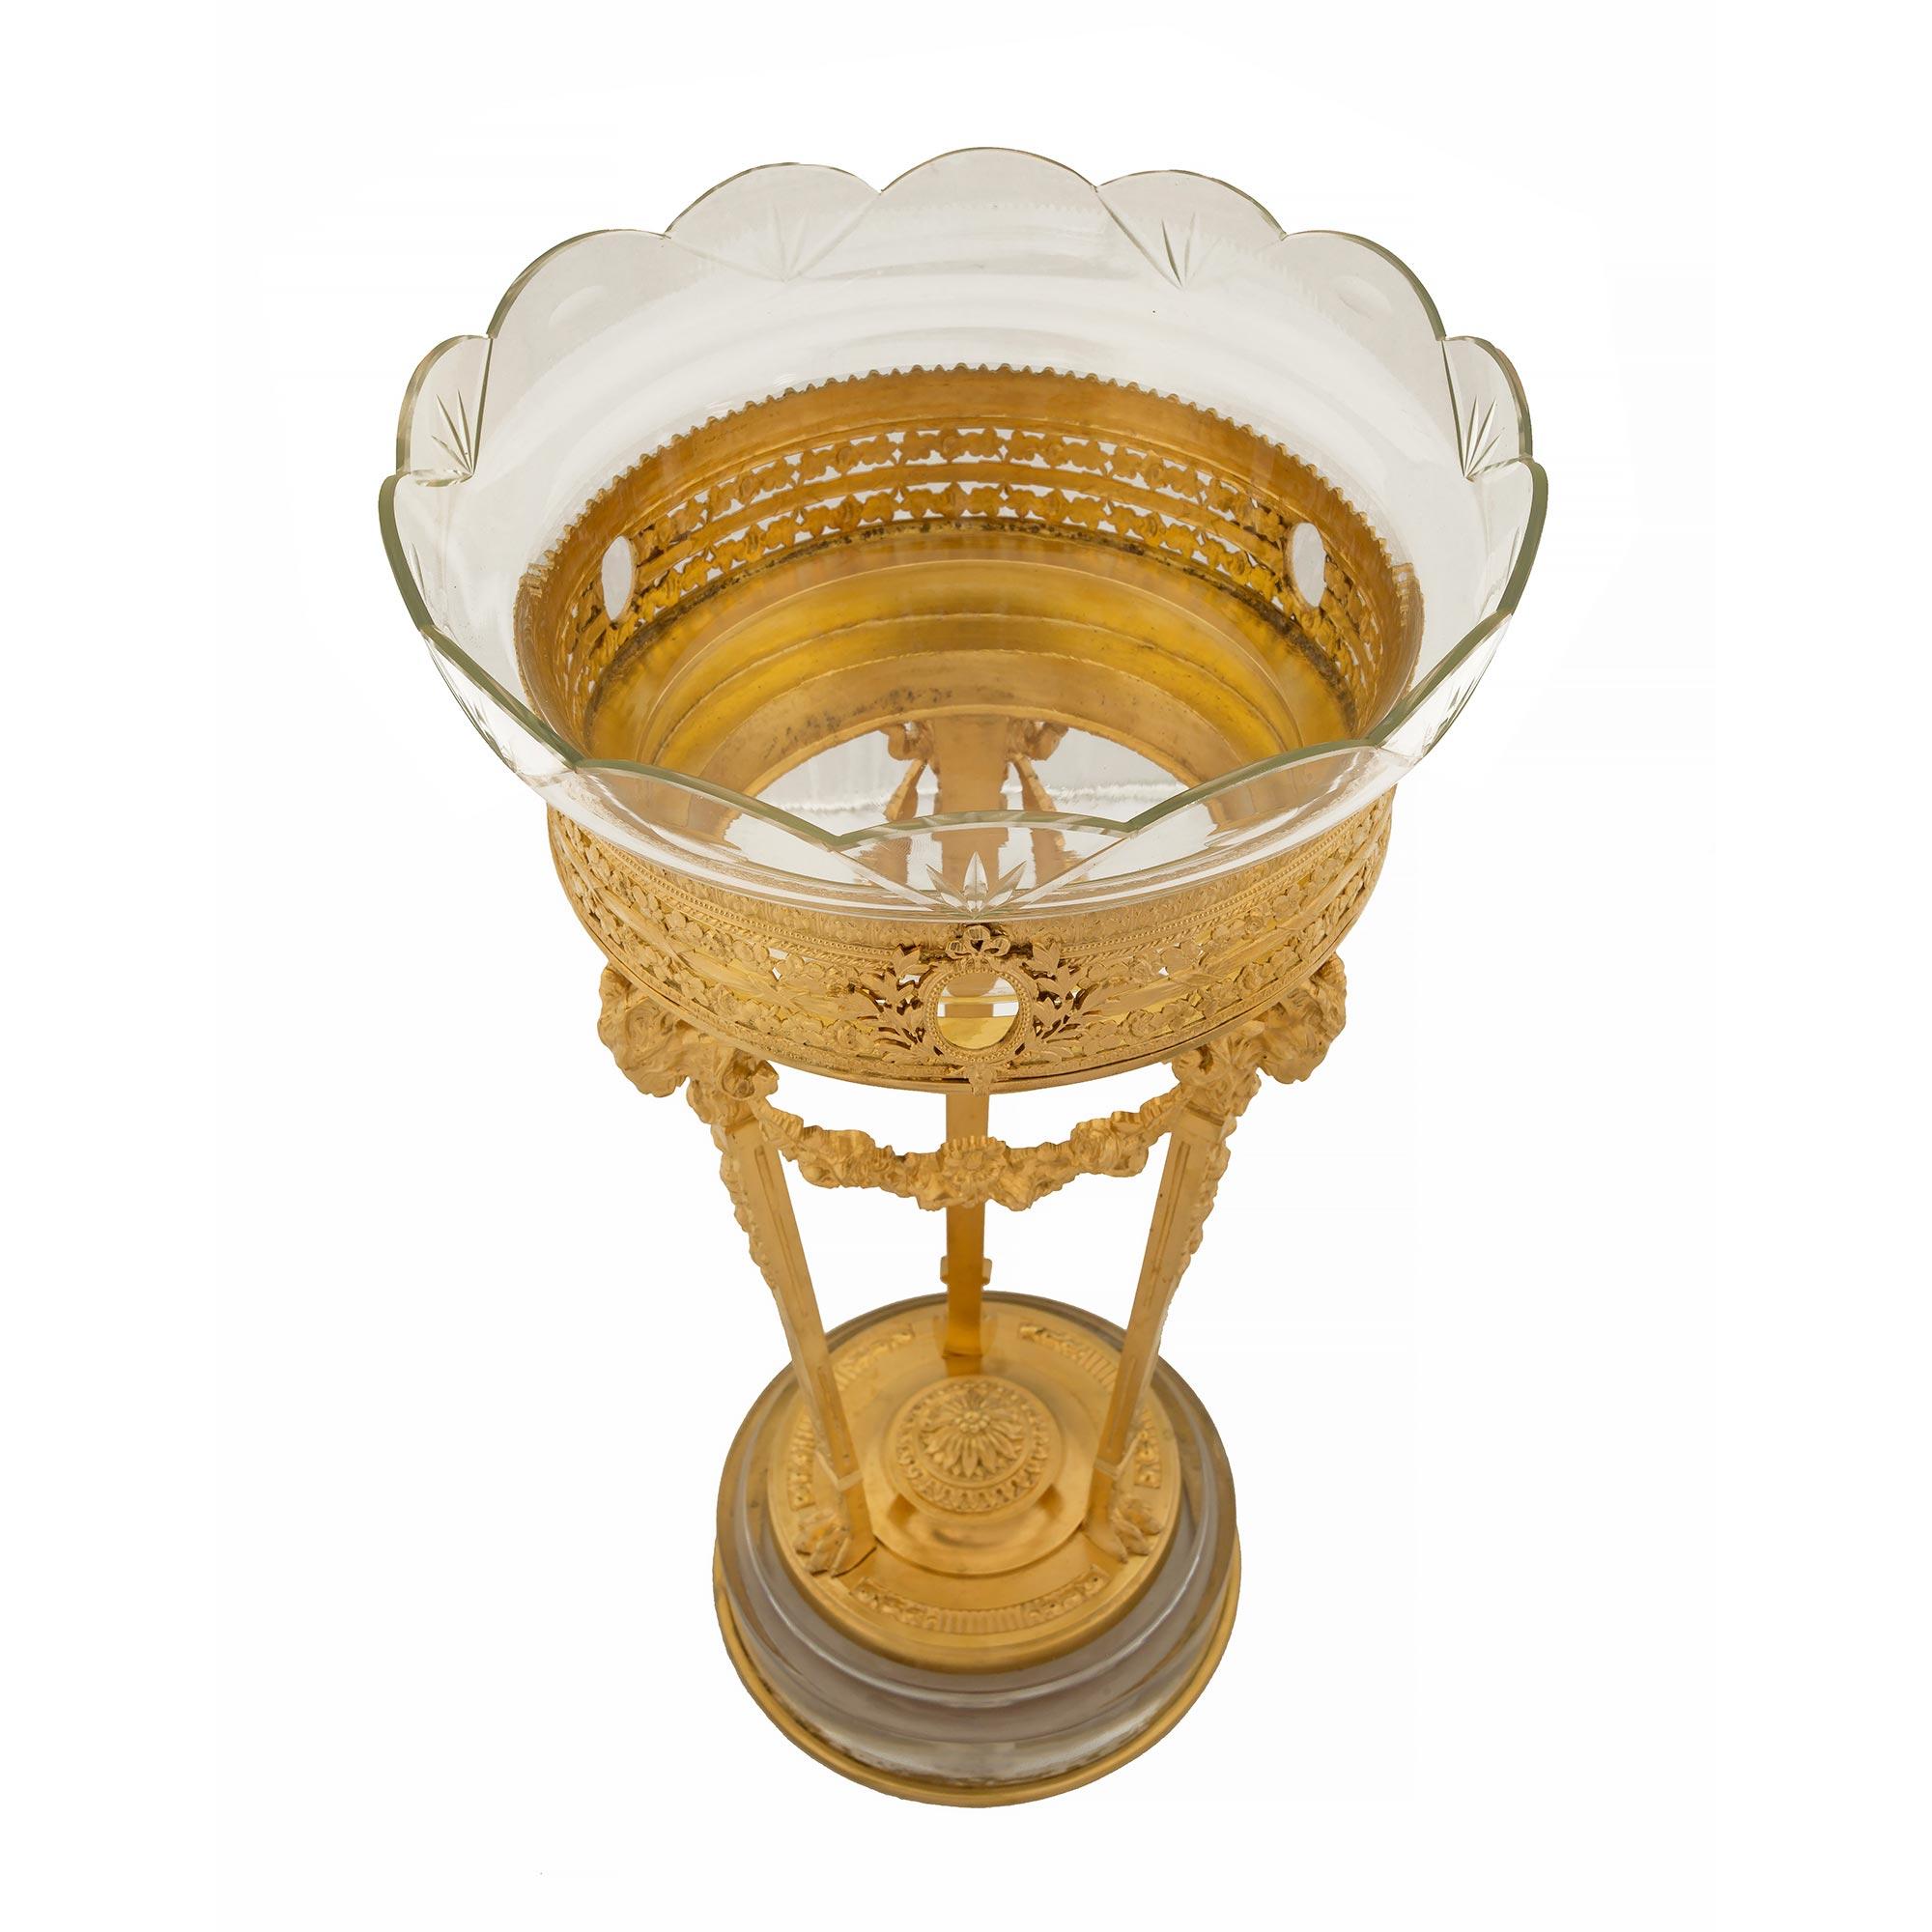 A very decorative French 19th century Louis XVI st. ormolu and Baccarat crystal Présentoire. The centerpiece is raised by a solid Baccarat crystal base with ormolu trim. Above is a circular and finely chased ormolu base below the three supports that